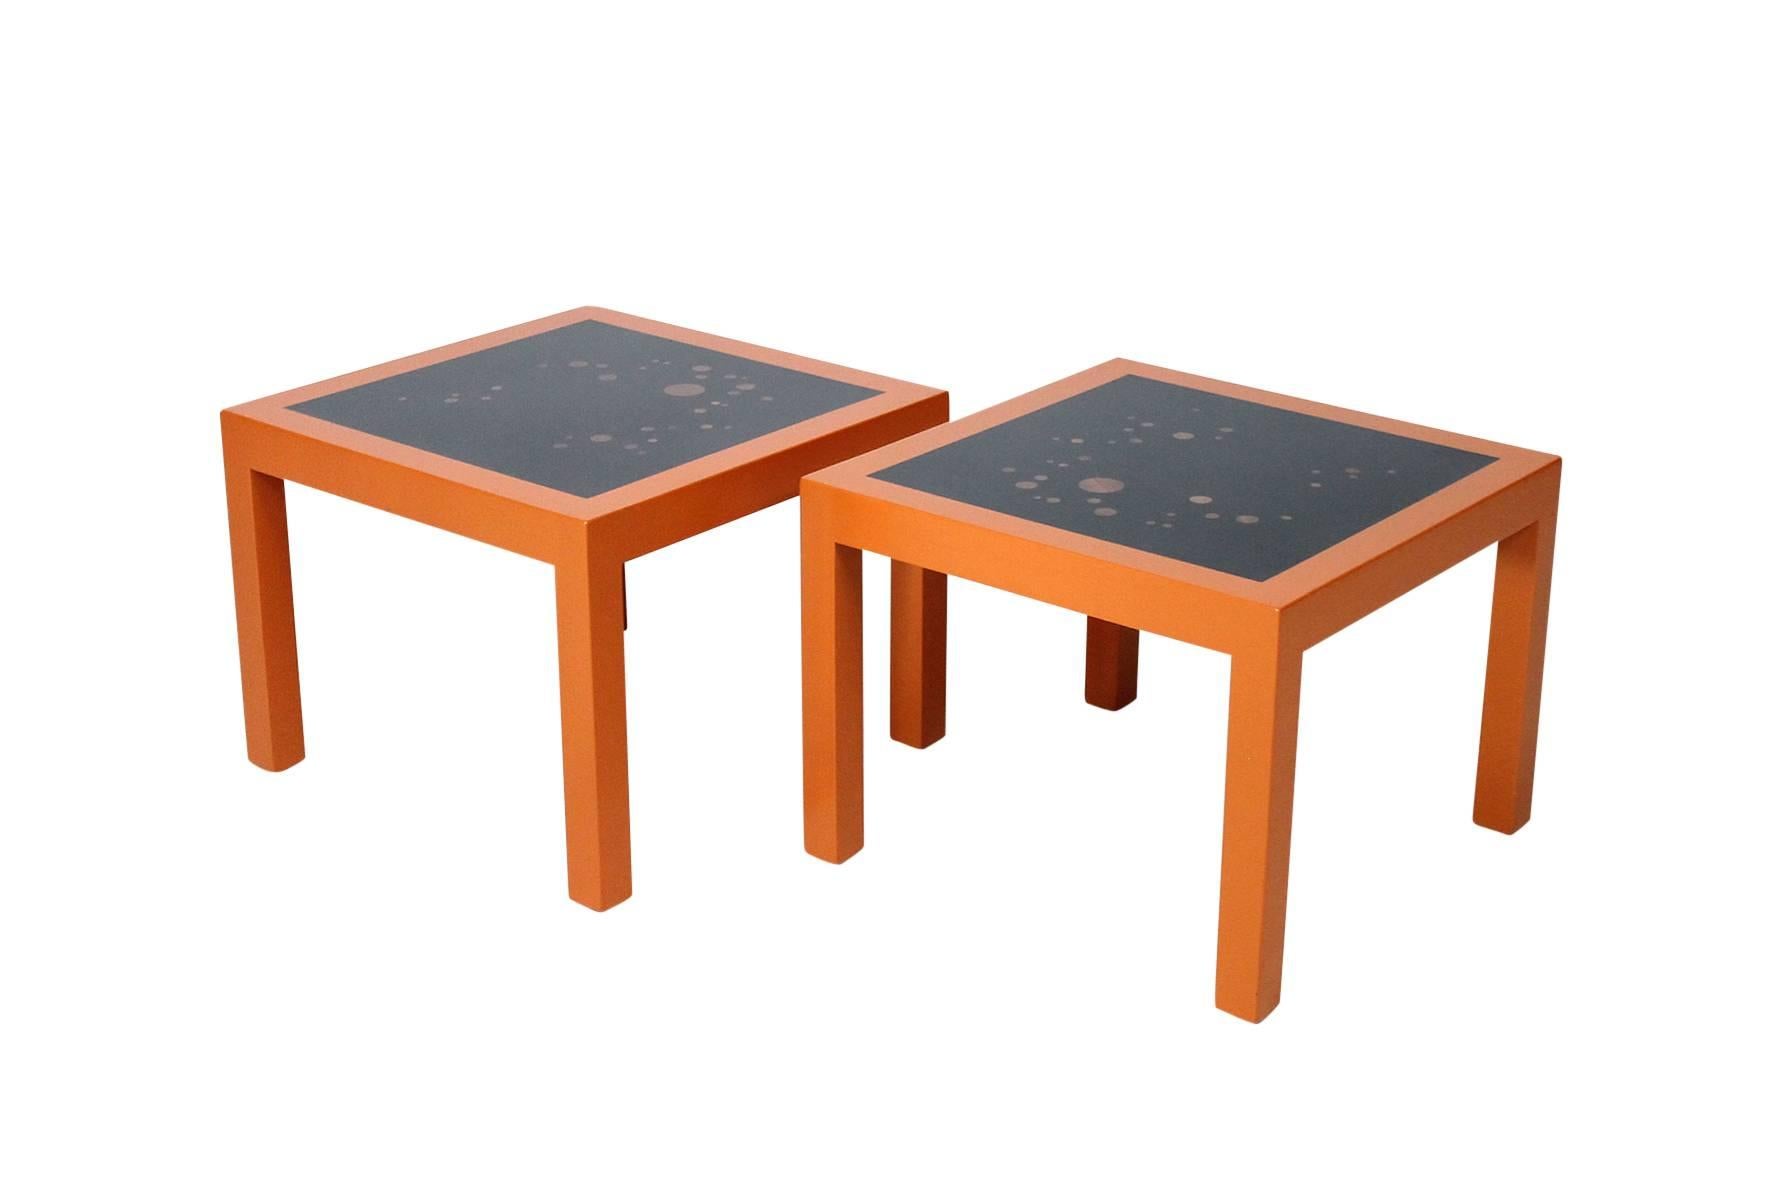 A rare pair of Edward Wormley for Dunbar end tables with orange lacquered frames, black tops, and an array of walnut inlays. Signed with metal Dunbar label.